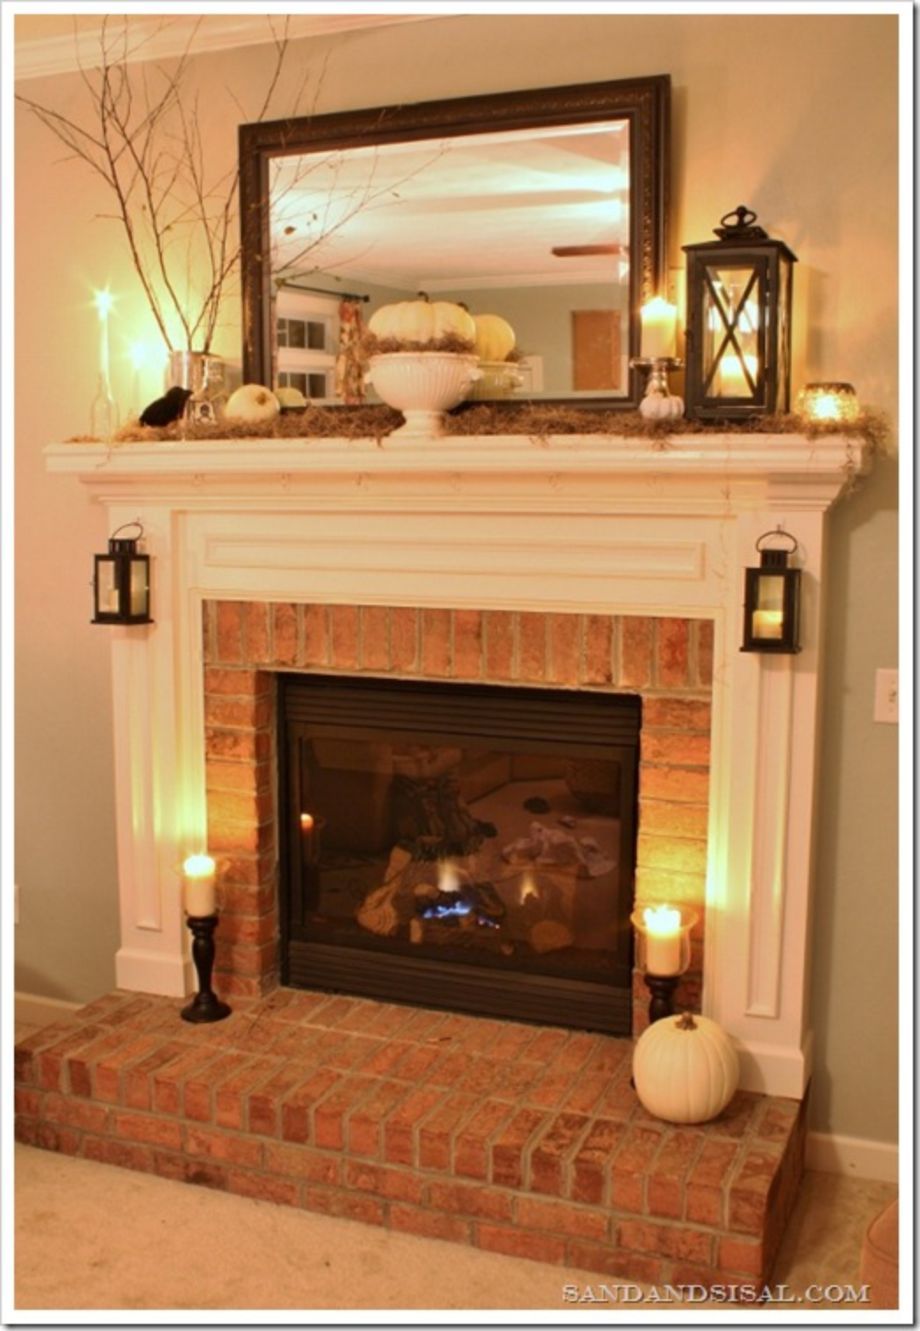 Brick Fireplace Makeover Awesome 54 Incredible Diy Brick Fireplace Makeover Ideas